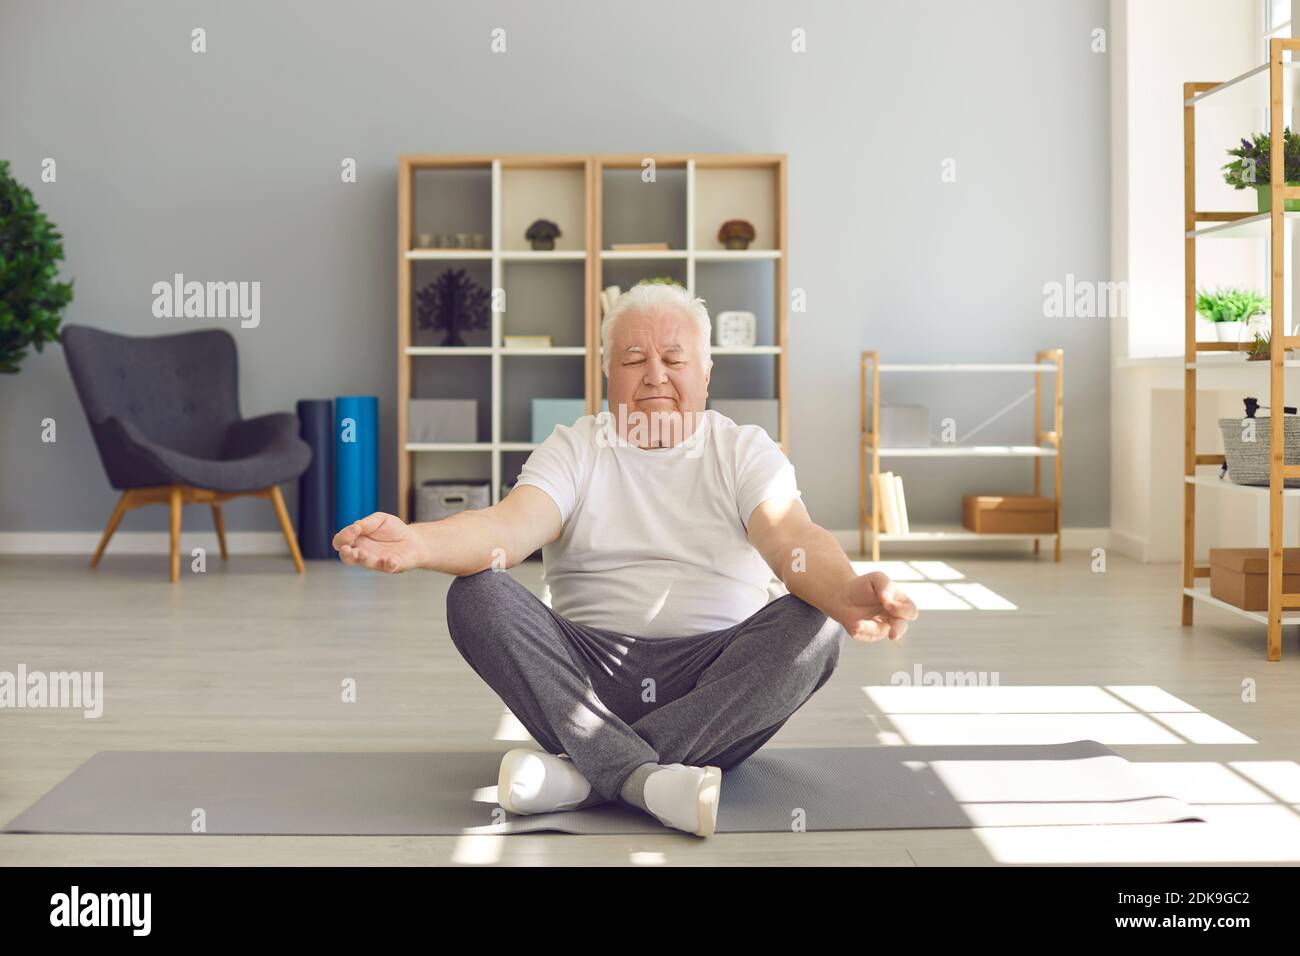 Senior man sitting in lotus position on fitness mat and meditating with eyes closed Stock Photo